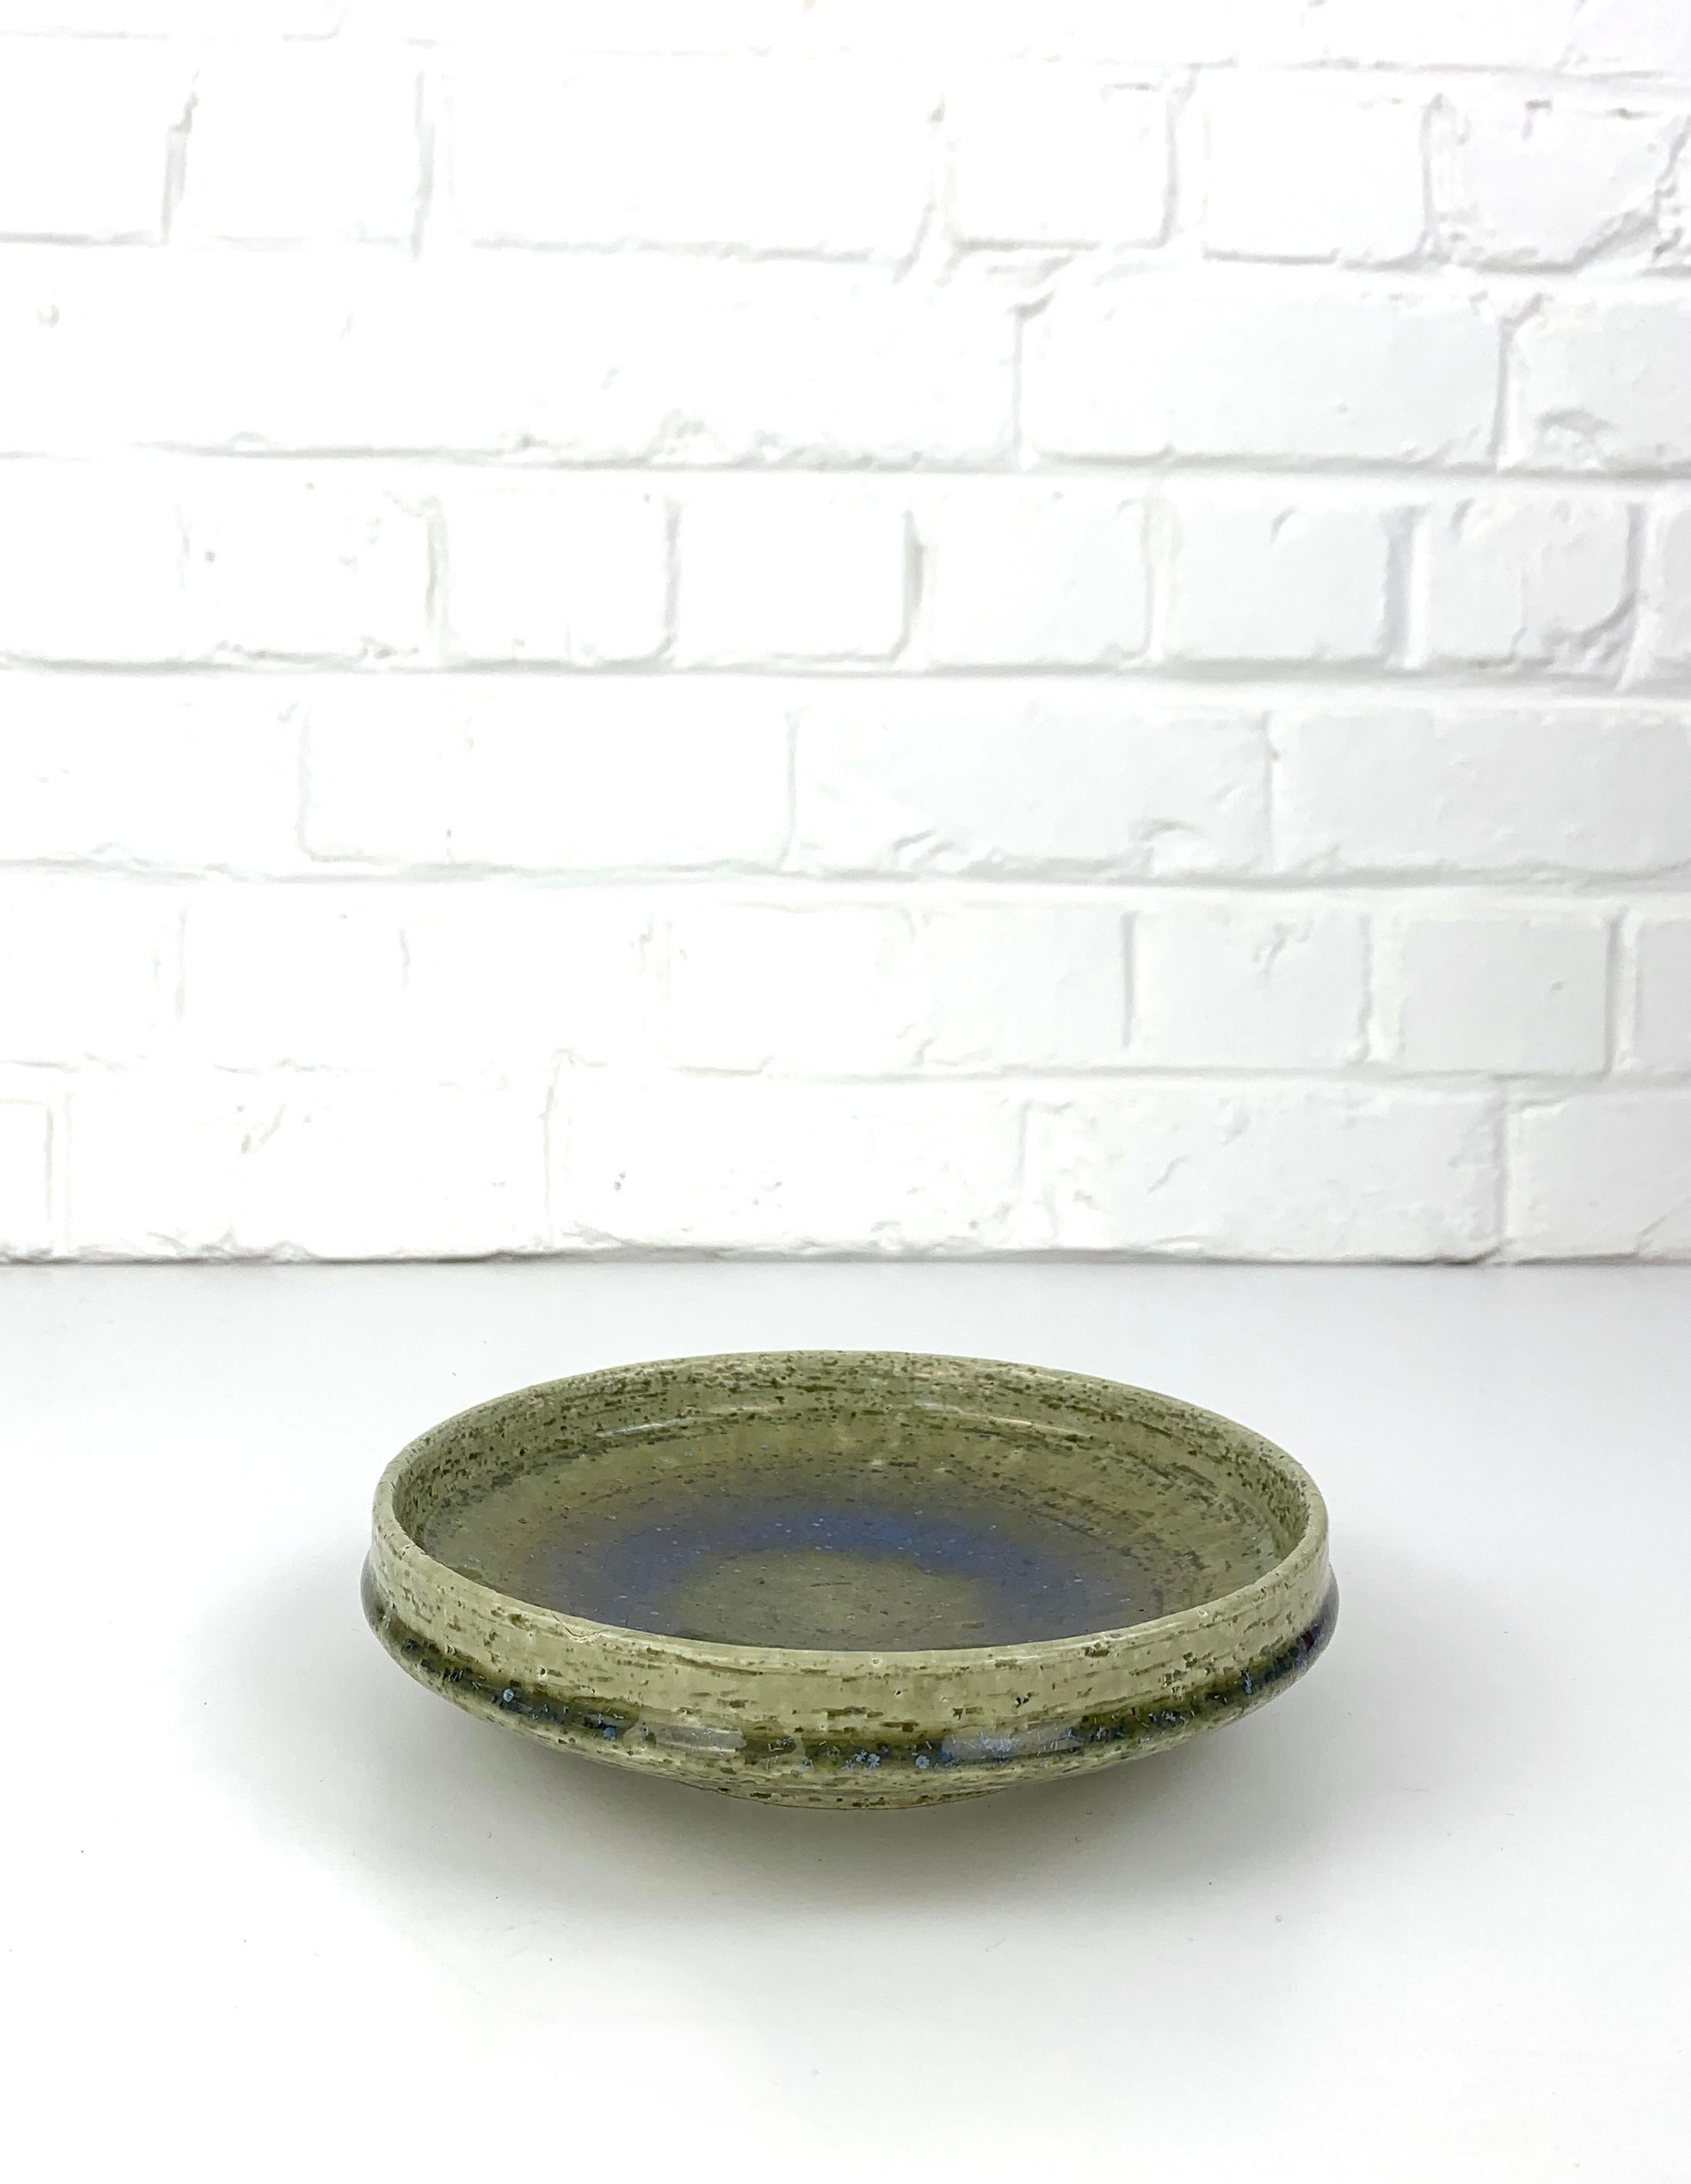 Ceramic vide-poche or low bowl in olive green tones with a subtle blue flame in the center. It comes with a thick glaze.

Scandinavian Mid-Century 1960s, produced by Palshus (Denmark), founded by Per and his wife Annelise Linnemann-Schmidt. 

The